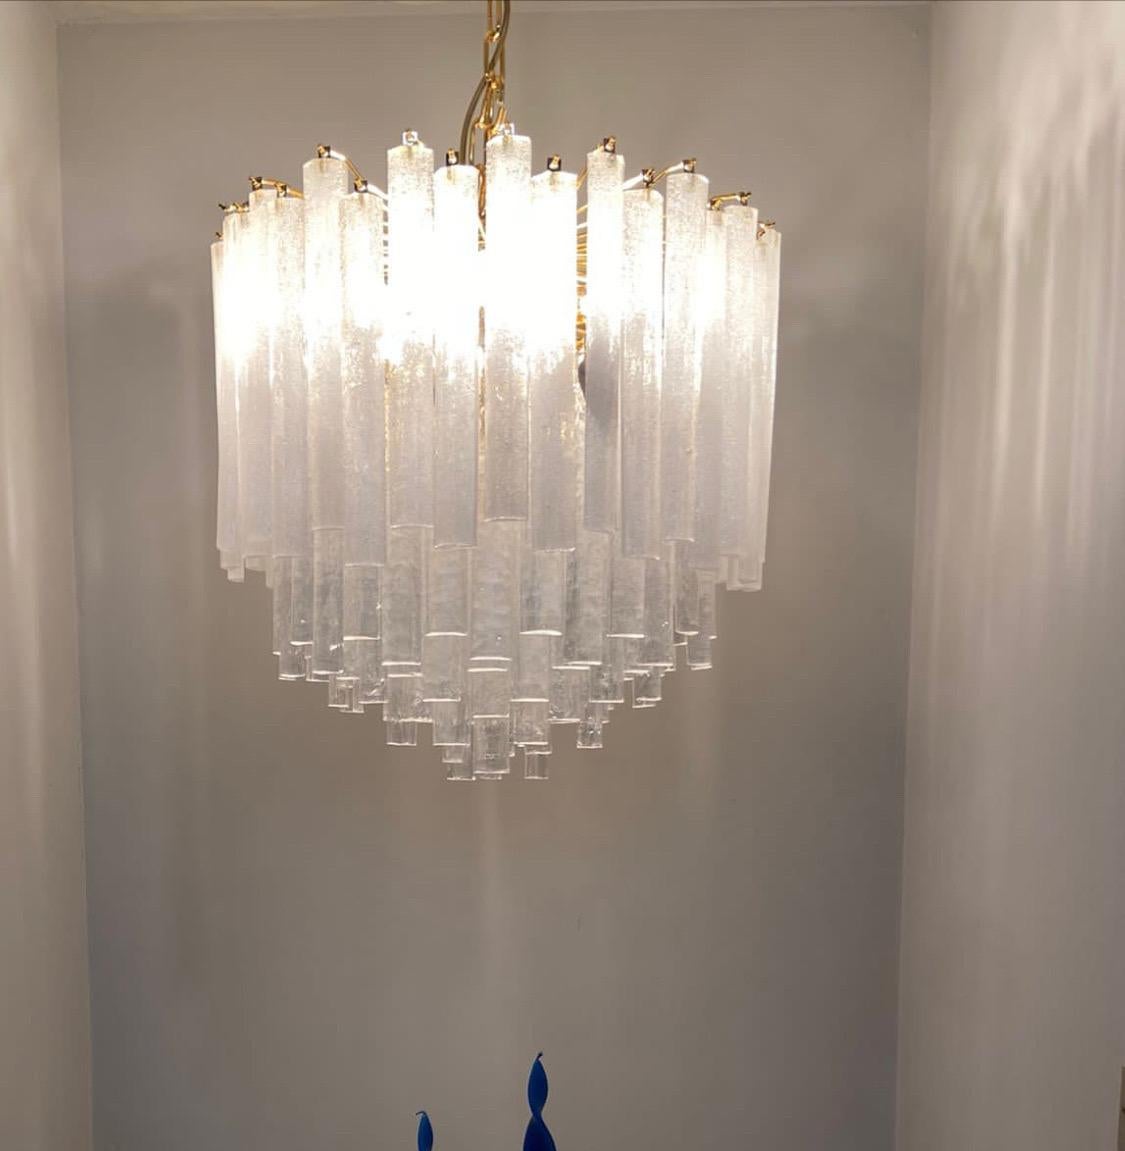 An high quality murano glass chandelier designed and manufactured i Italy by Mazzega in the Seventies, the chandelier comes from an important lighting shop that was going out of business, so it has never been installed in a home and therefore works